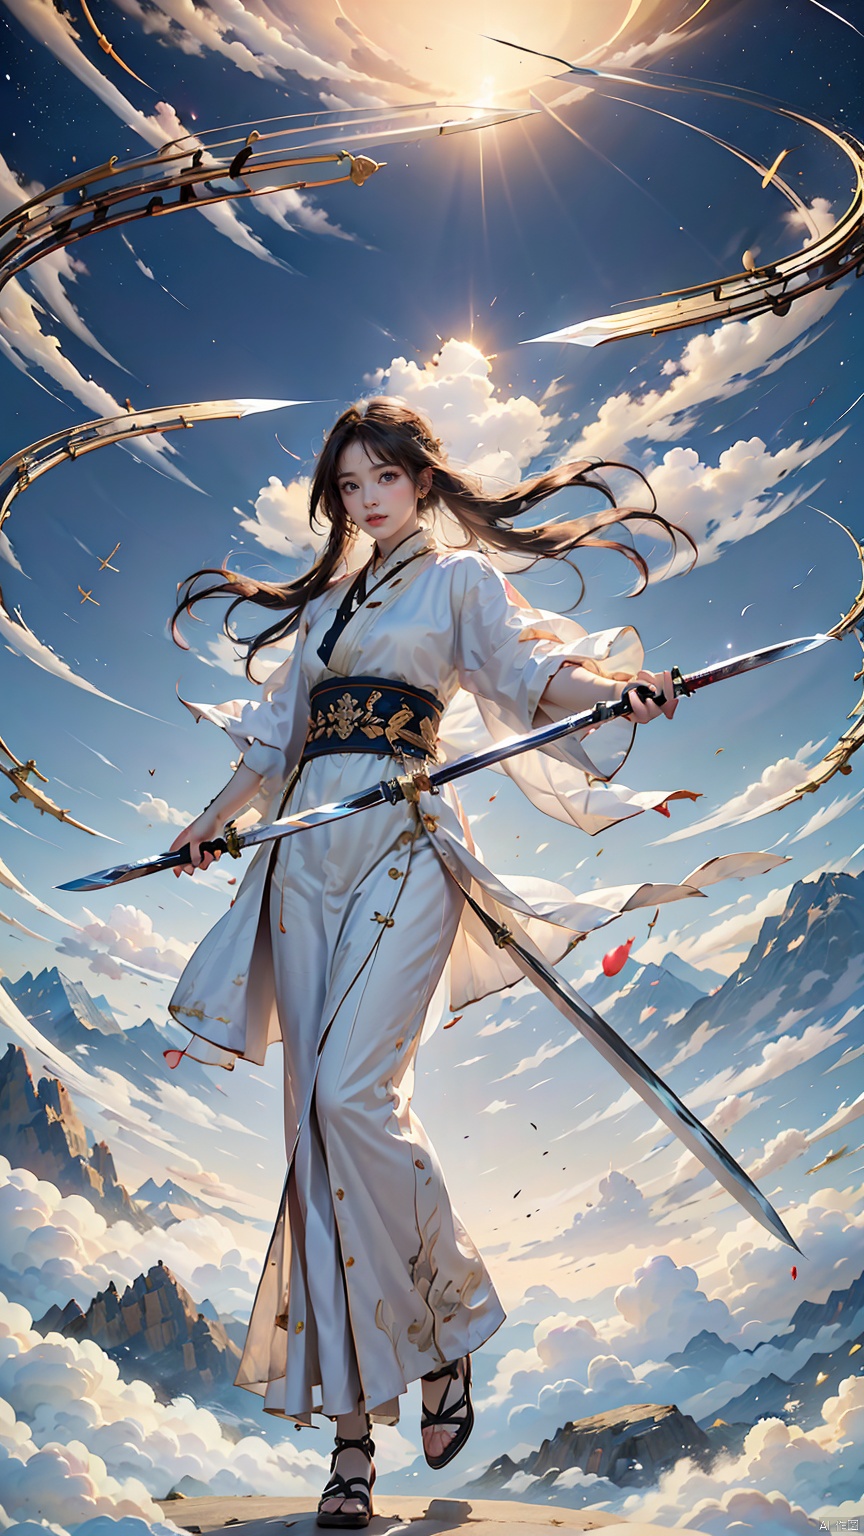  1 girl, solo, female focus: strengthening, (Full Body: 1.2), (Floating Swords * 100), 100 Floating Swords, lens light, Shadow of the Swords (Blade Storm: 1.2), circular waves, Night, cliffs, starry sky, clouds, clouds, mountains and rivers, ancient temples, Starry Night, Absorption, Incremental Absorption, Beyond Reality,
(Masterpiece), (Very Detailed CGUnit 8K Wallpaper), Best Quality, High Resolution Illustrations,